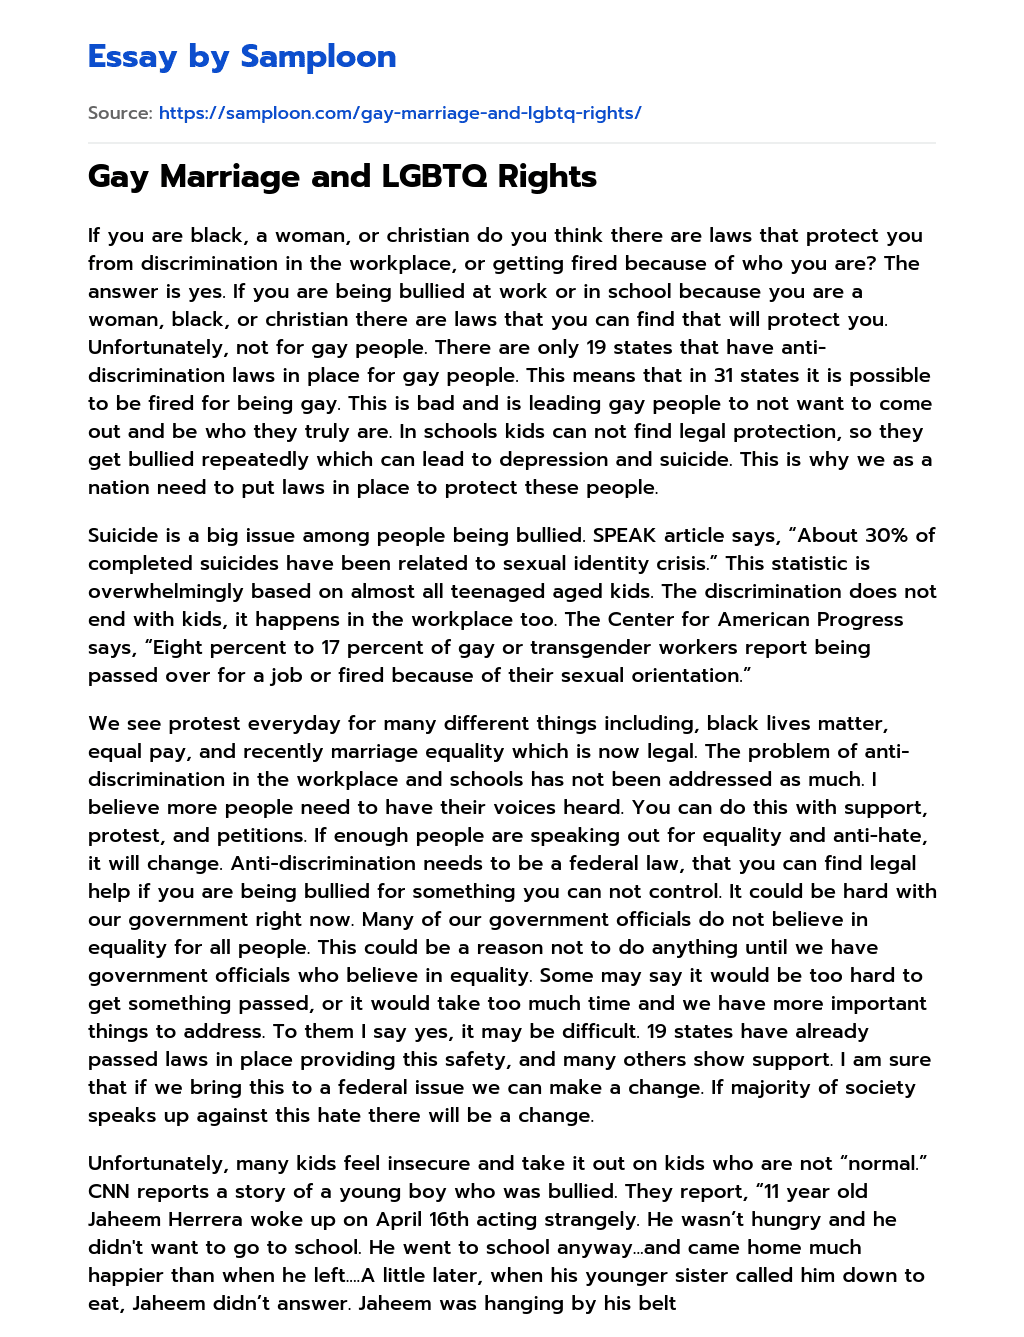 Gay Marriage and LGBTQ Rights essay